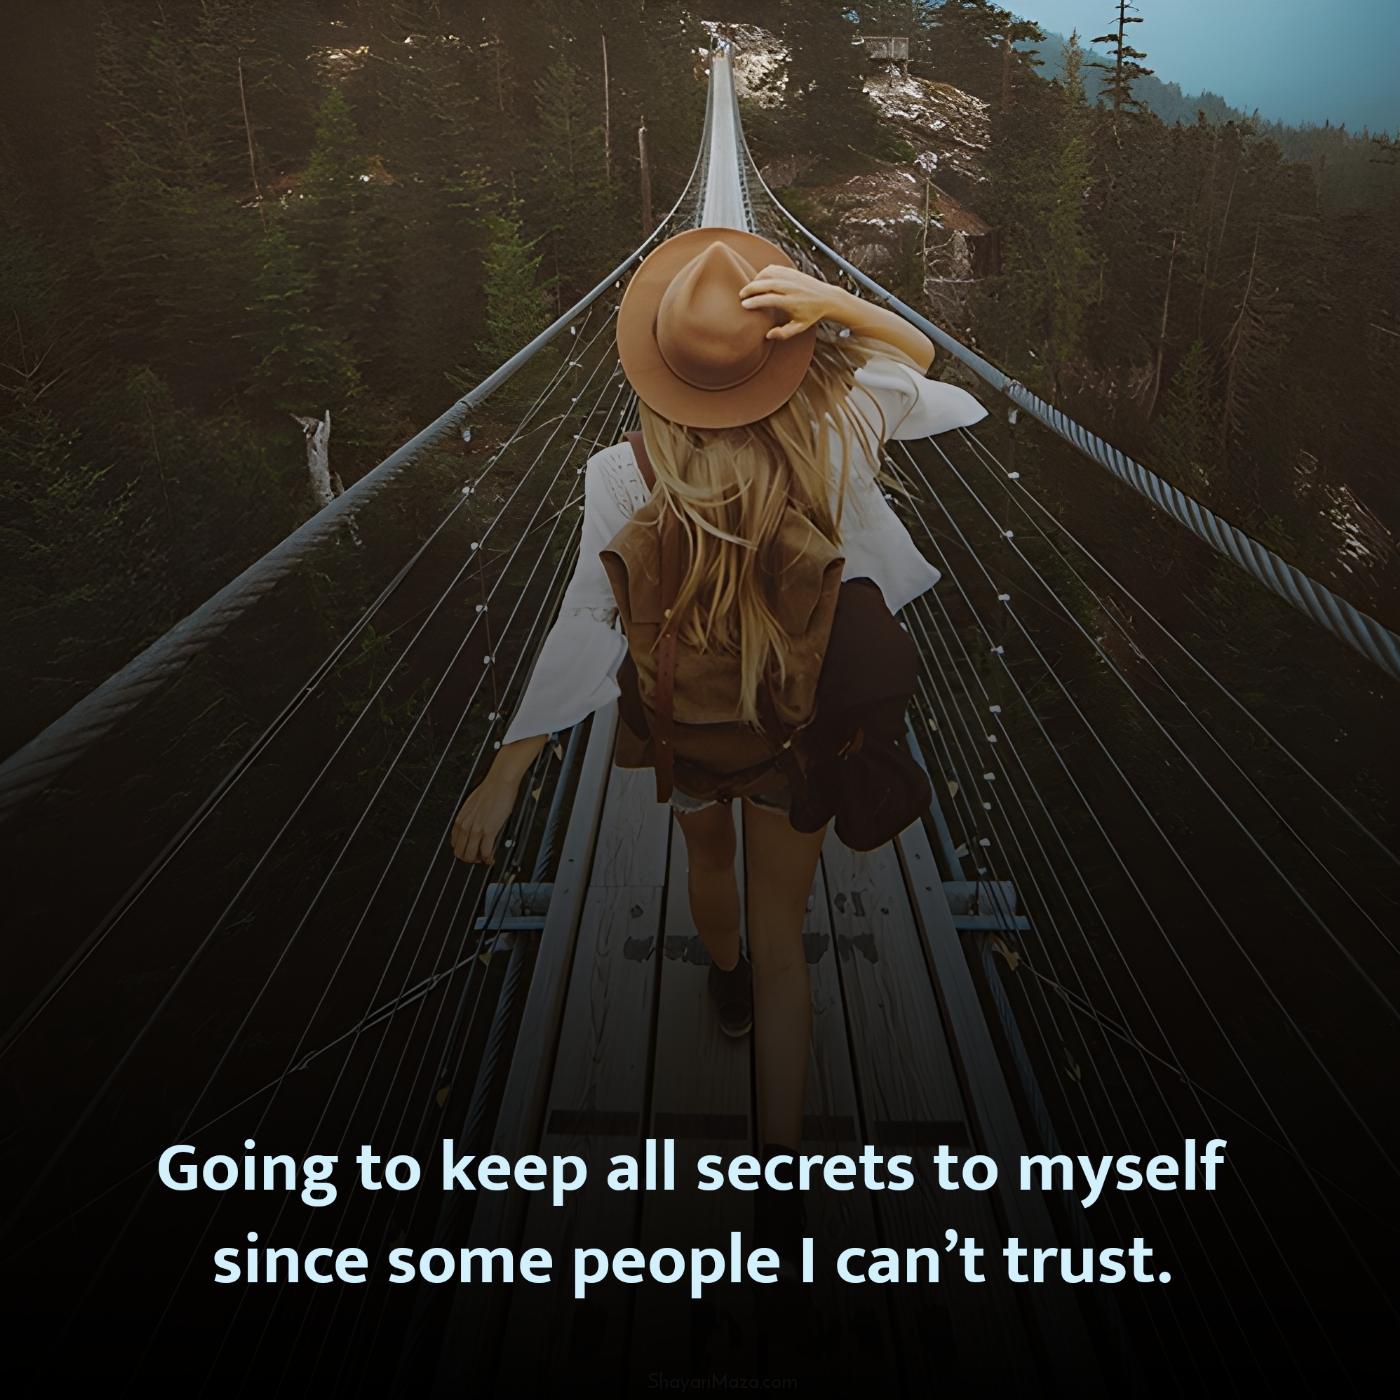 Going to keep all secrets to myself since some people I cant trust